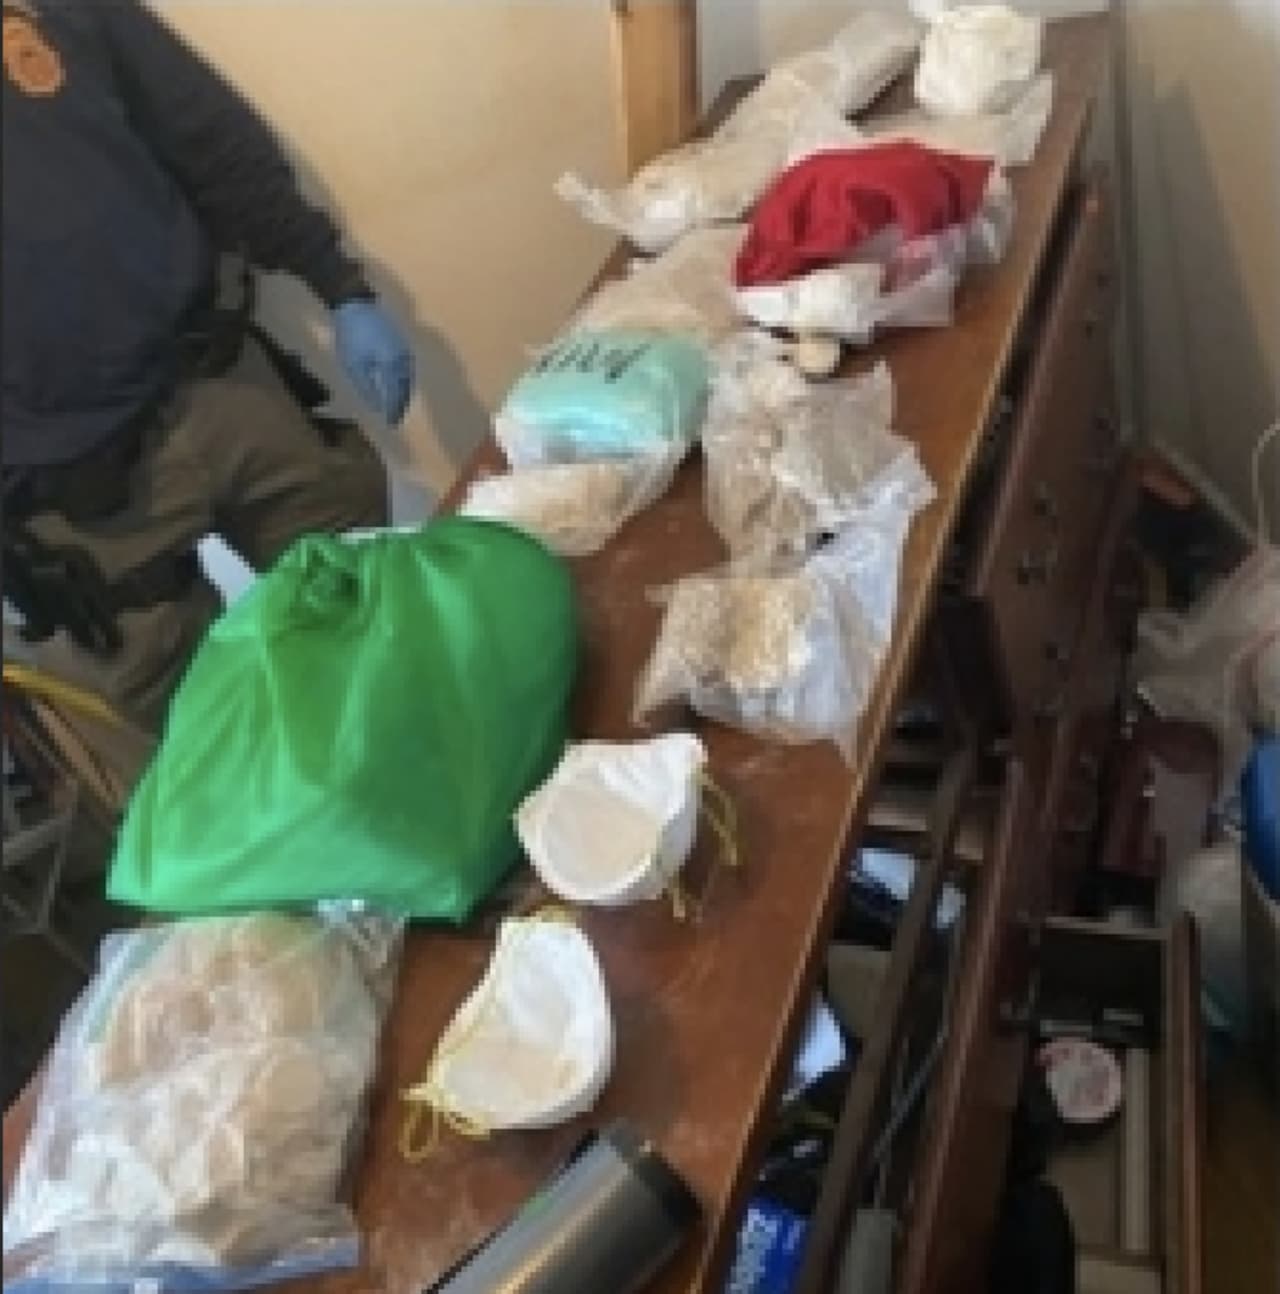 Agents show off some of the items they seized from Benito Bello's Bronx home. That included 14 kilograms of fentanyl, one kilogram of cocaine, a kilogram press, a pill press, and a scale, the DEA said.